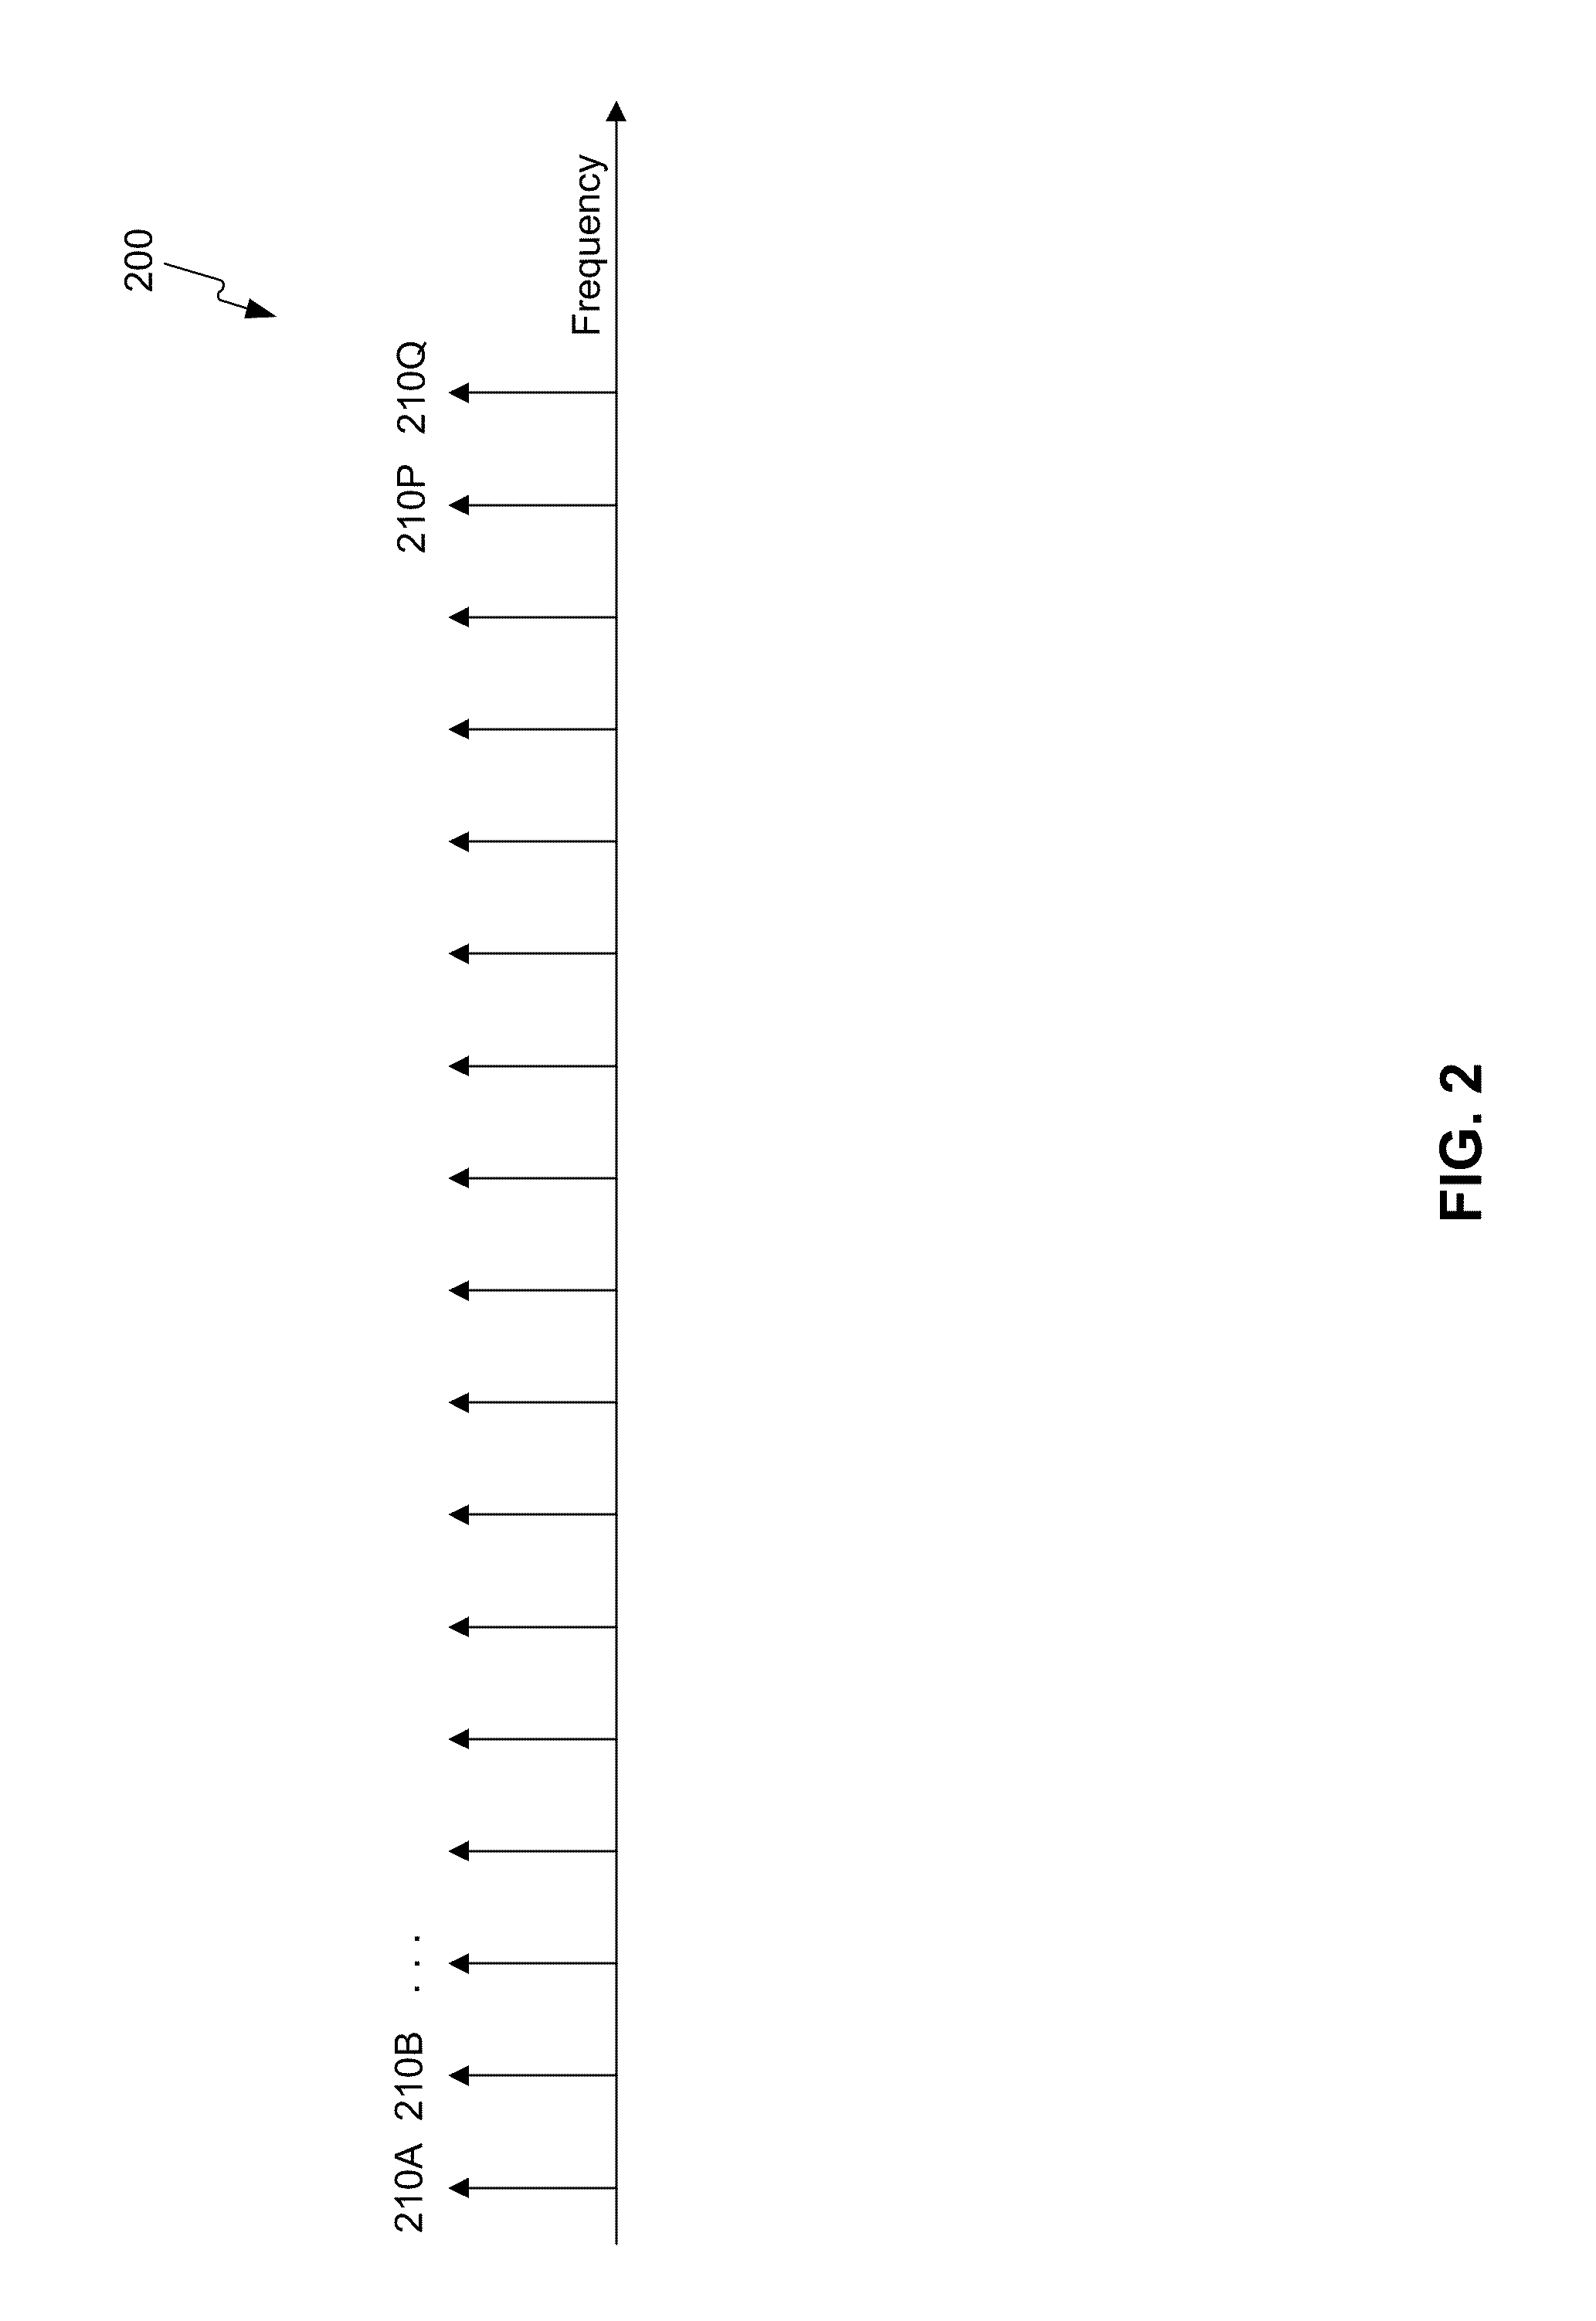 Data transmission via multi-path channels using orthogonal multi-frequency signals with differential phase shift keying modulation